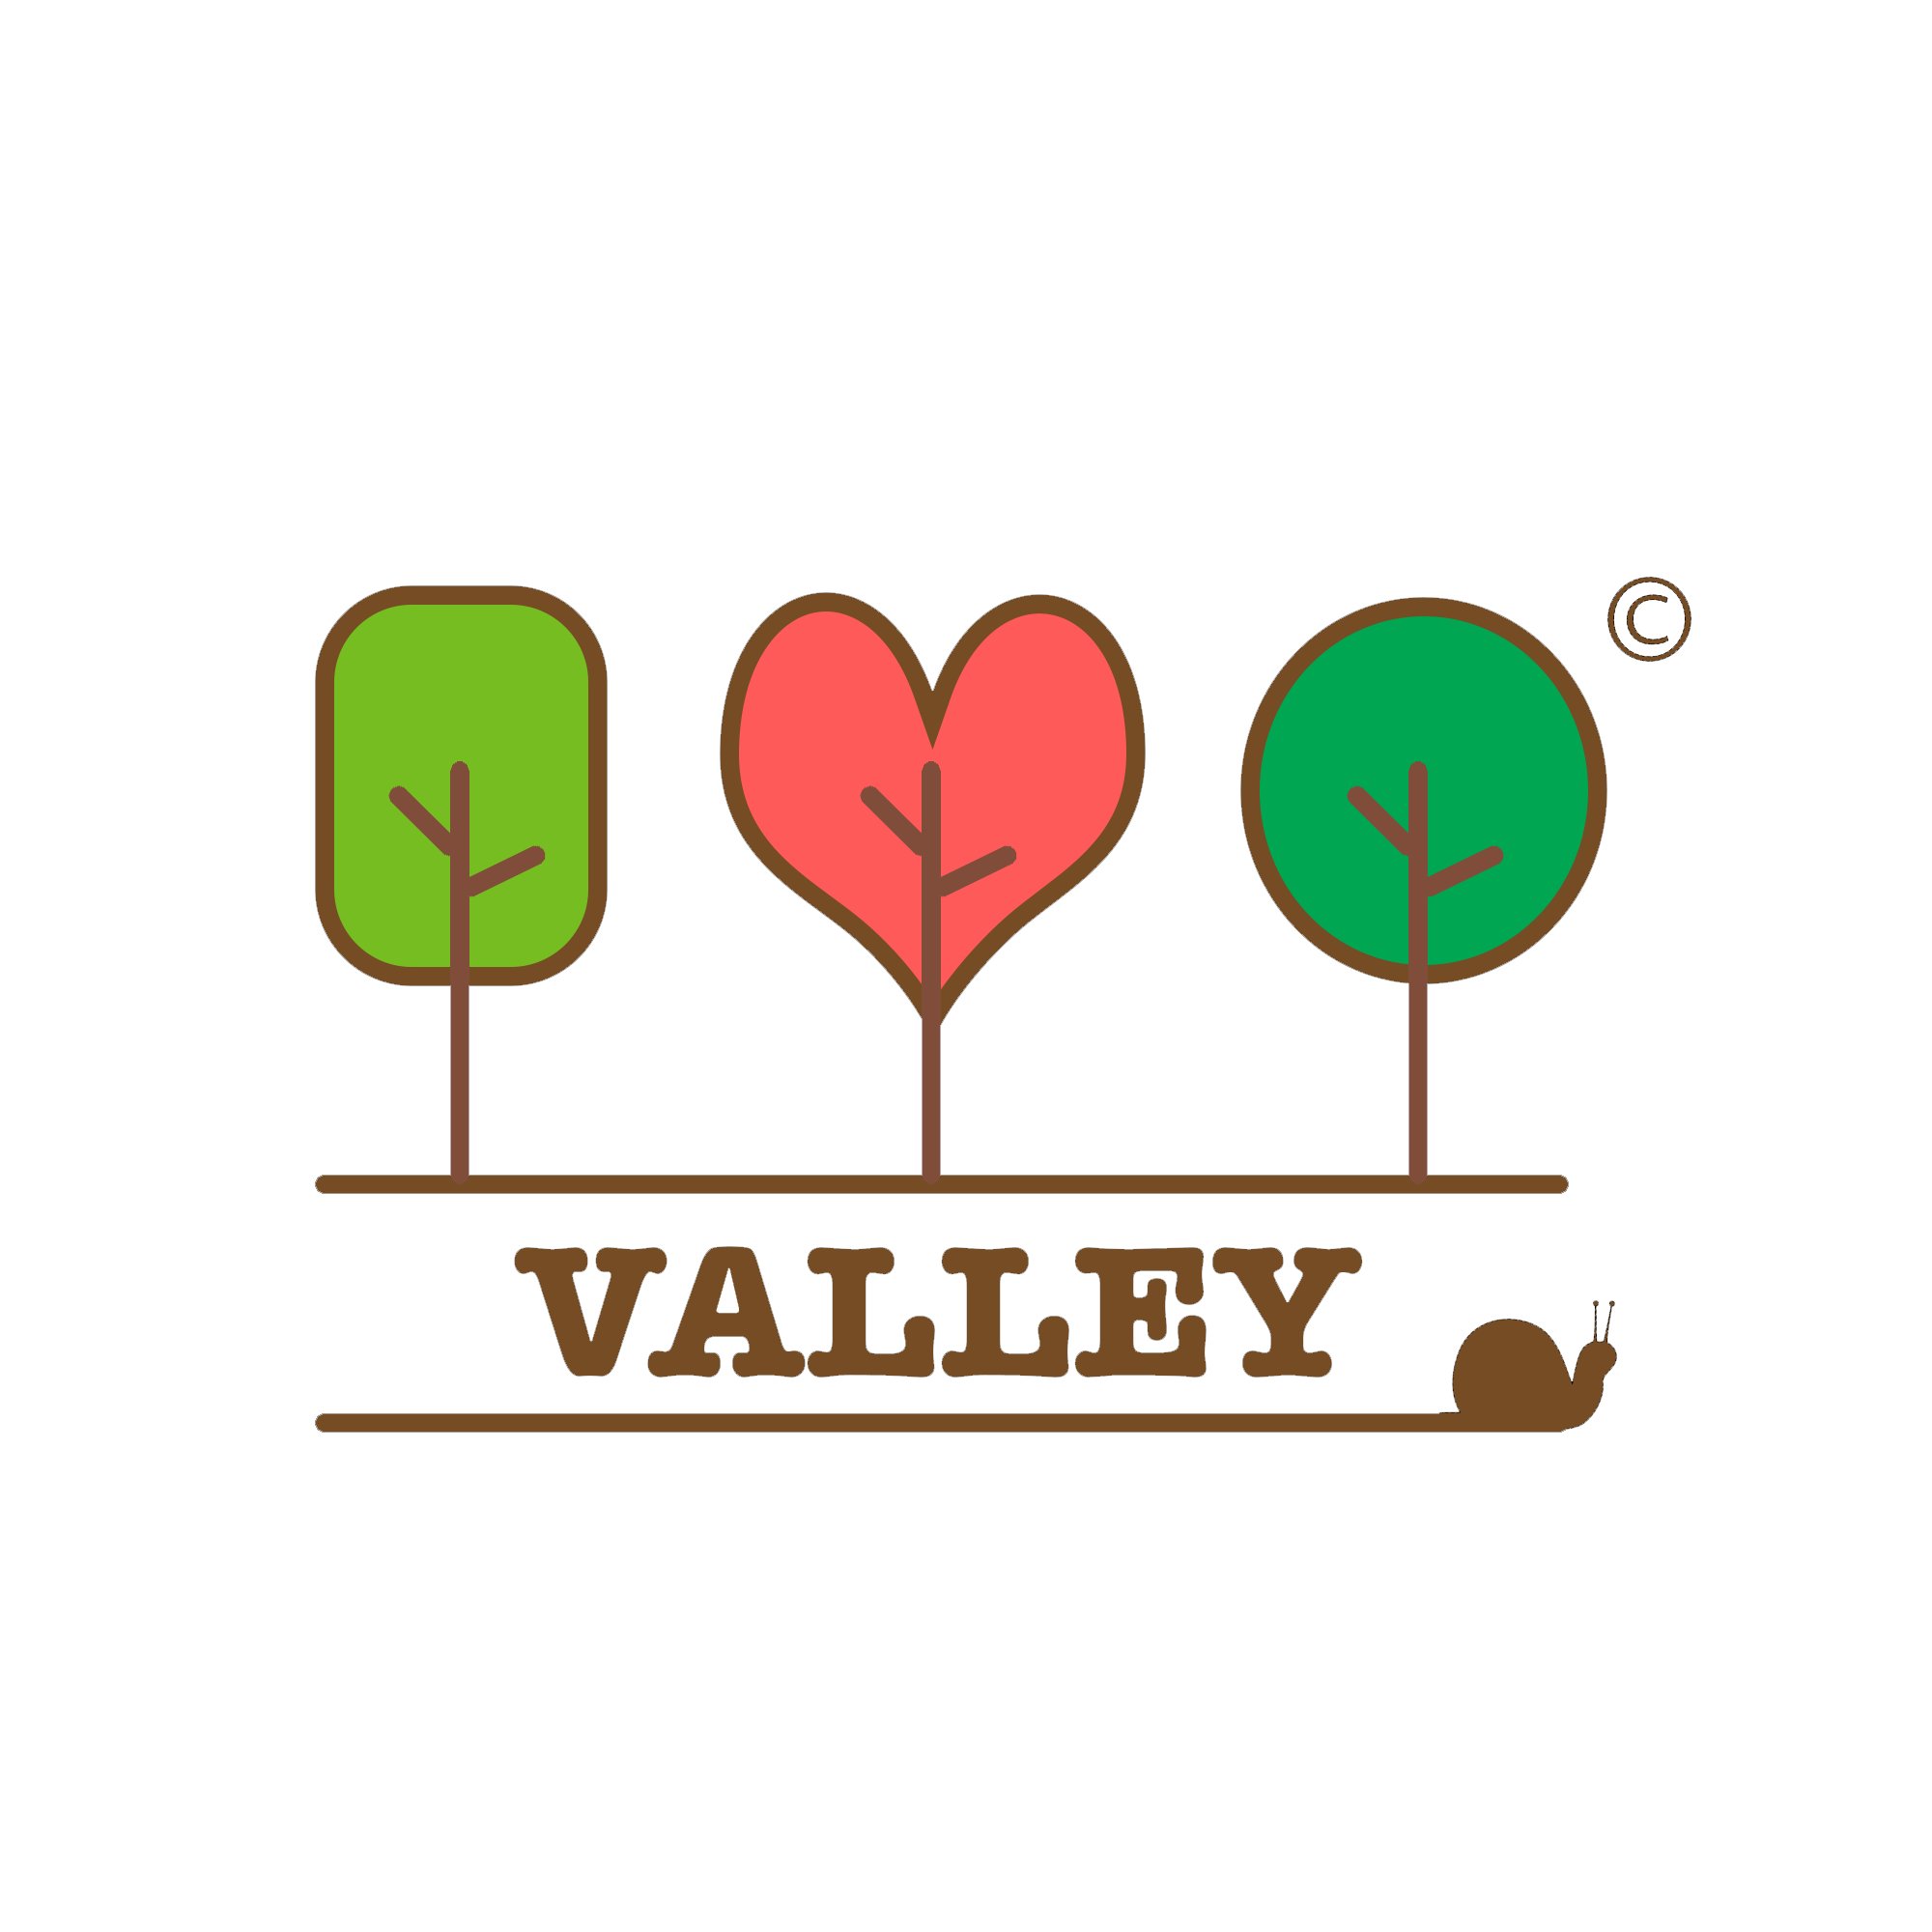 I 'm running a gift shop called Valley in suanluang square,BkK,near BTS national Stadium station. Welcome everyone to visit us.